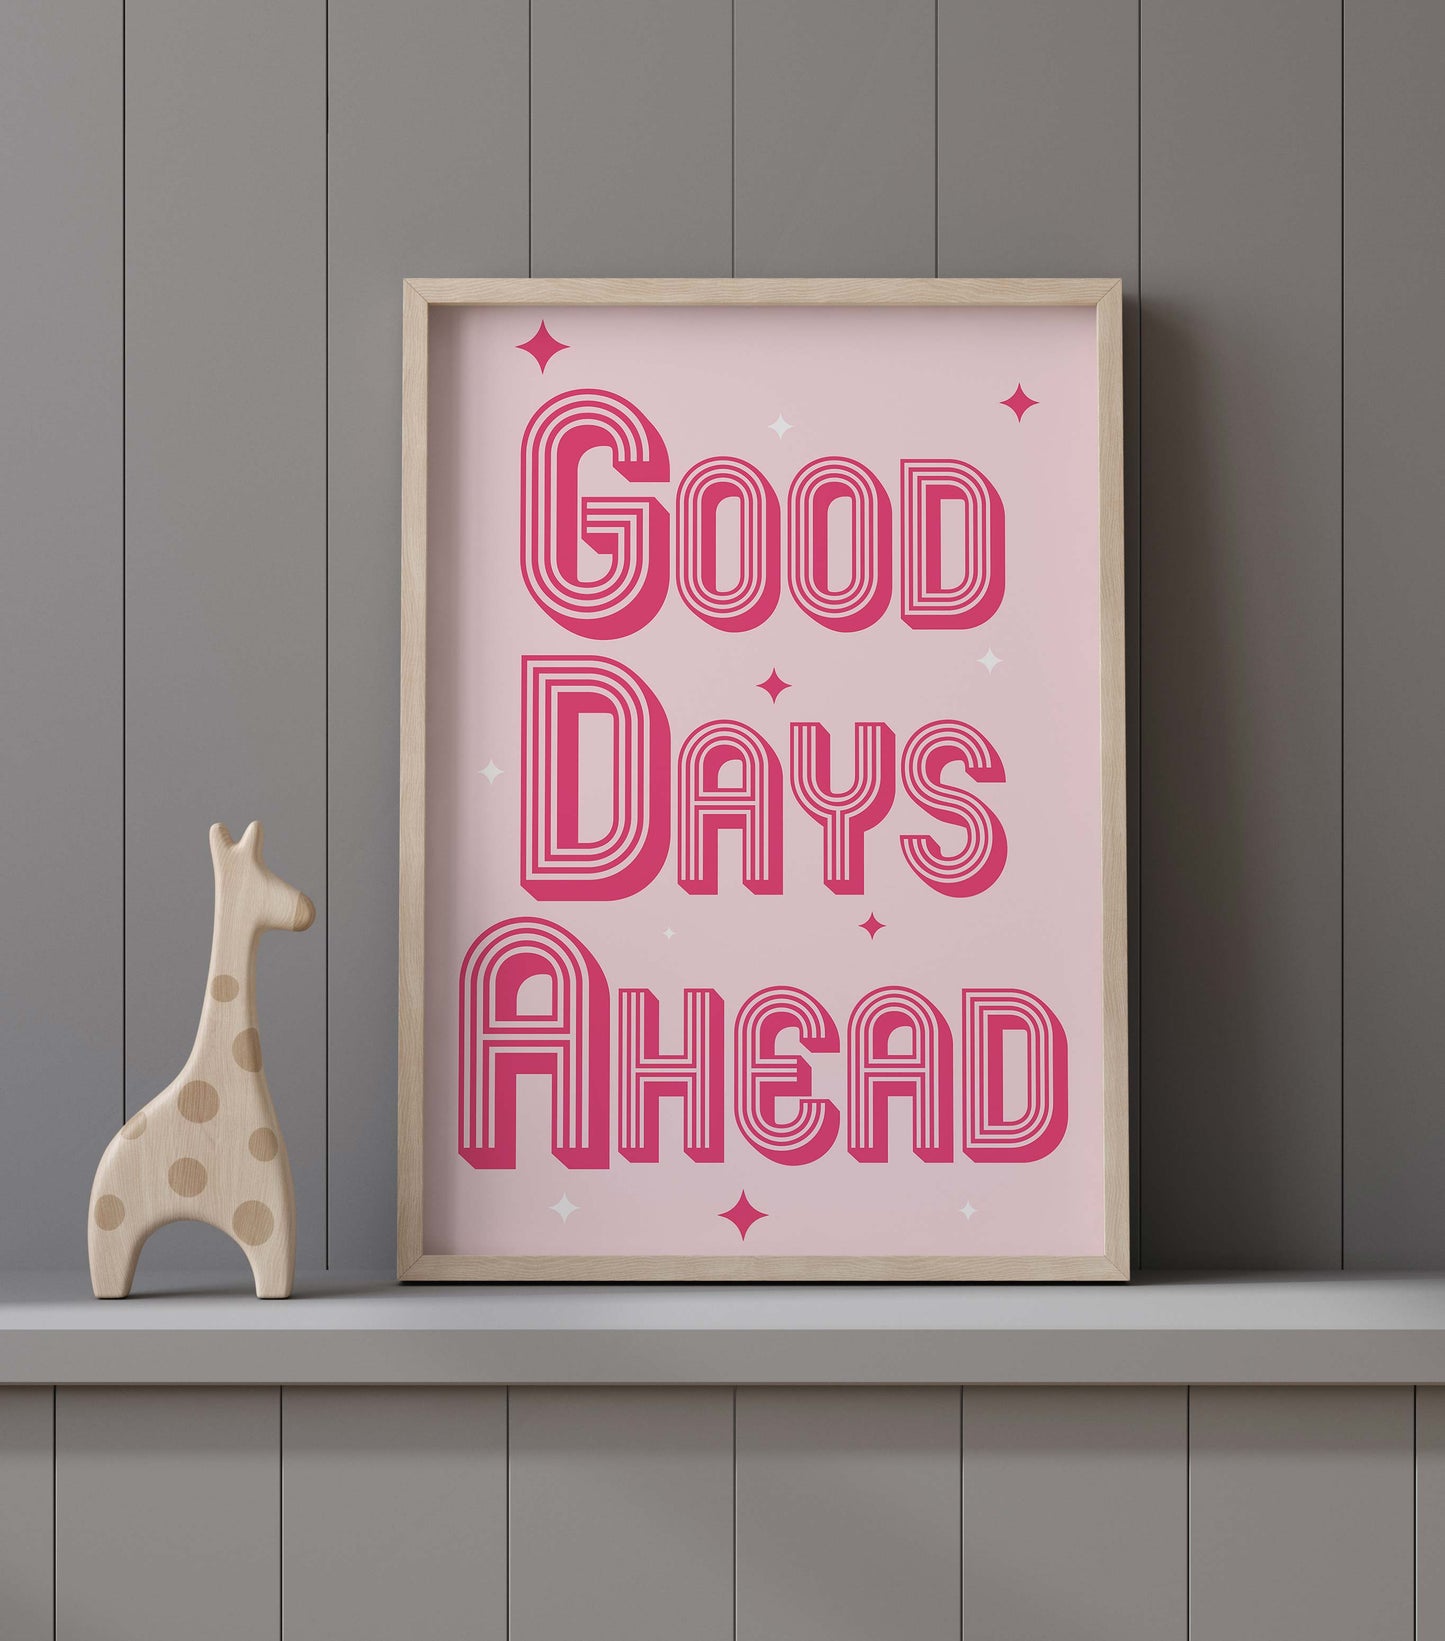 Pink Good Days Ahead Poster